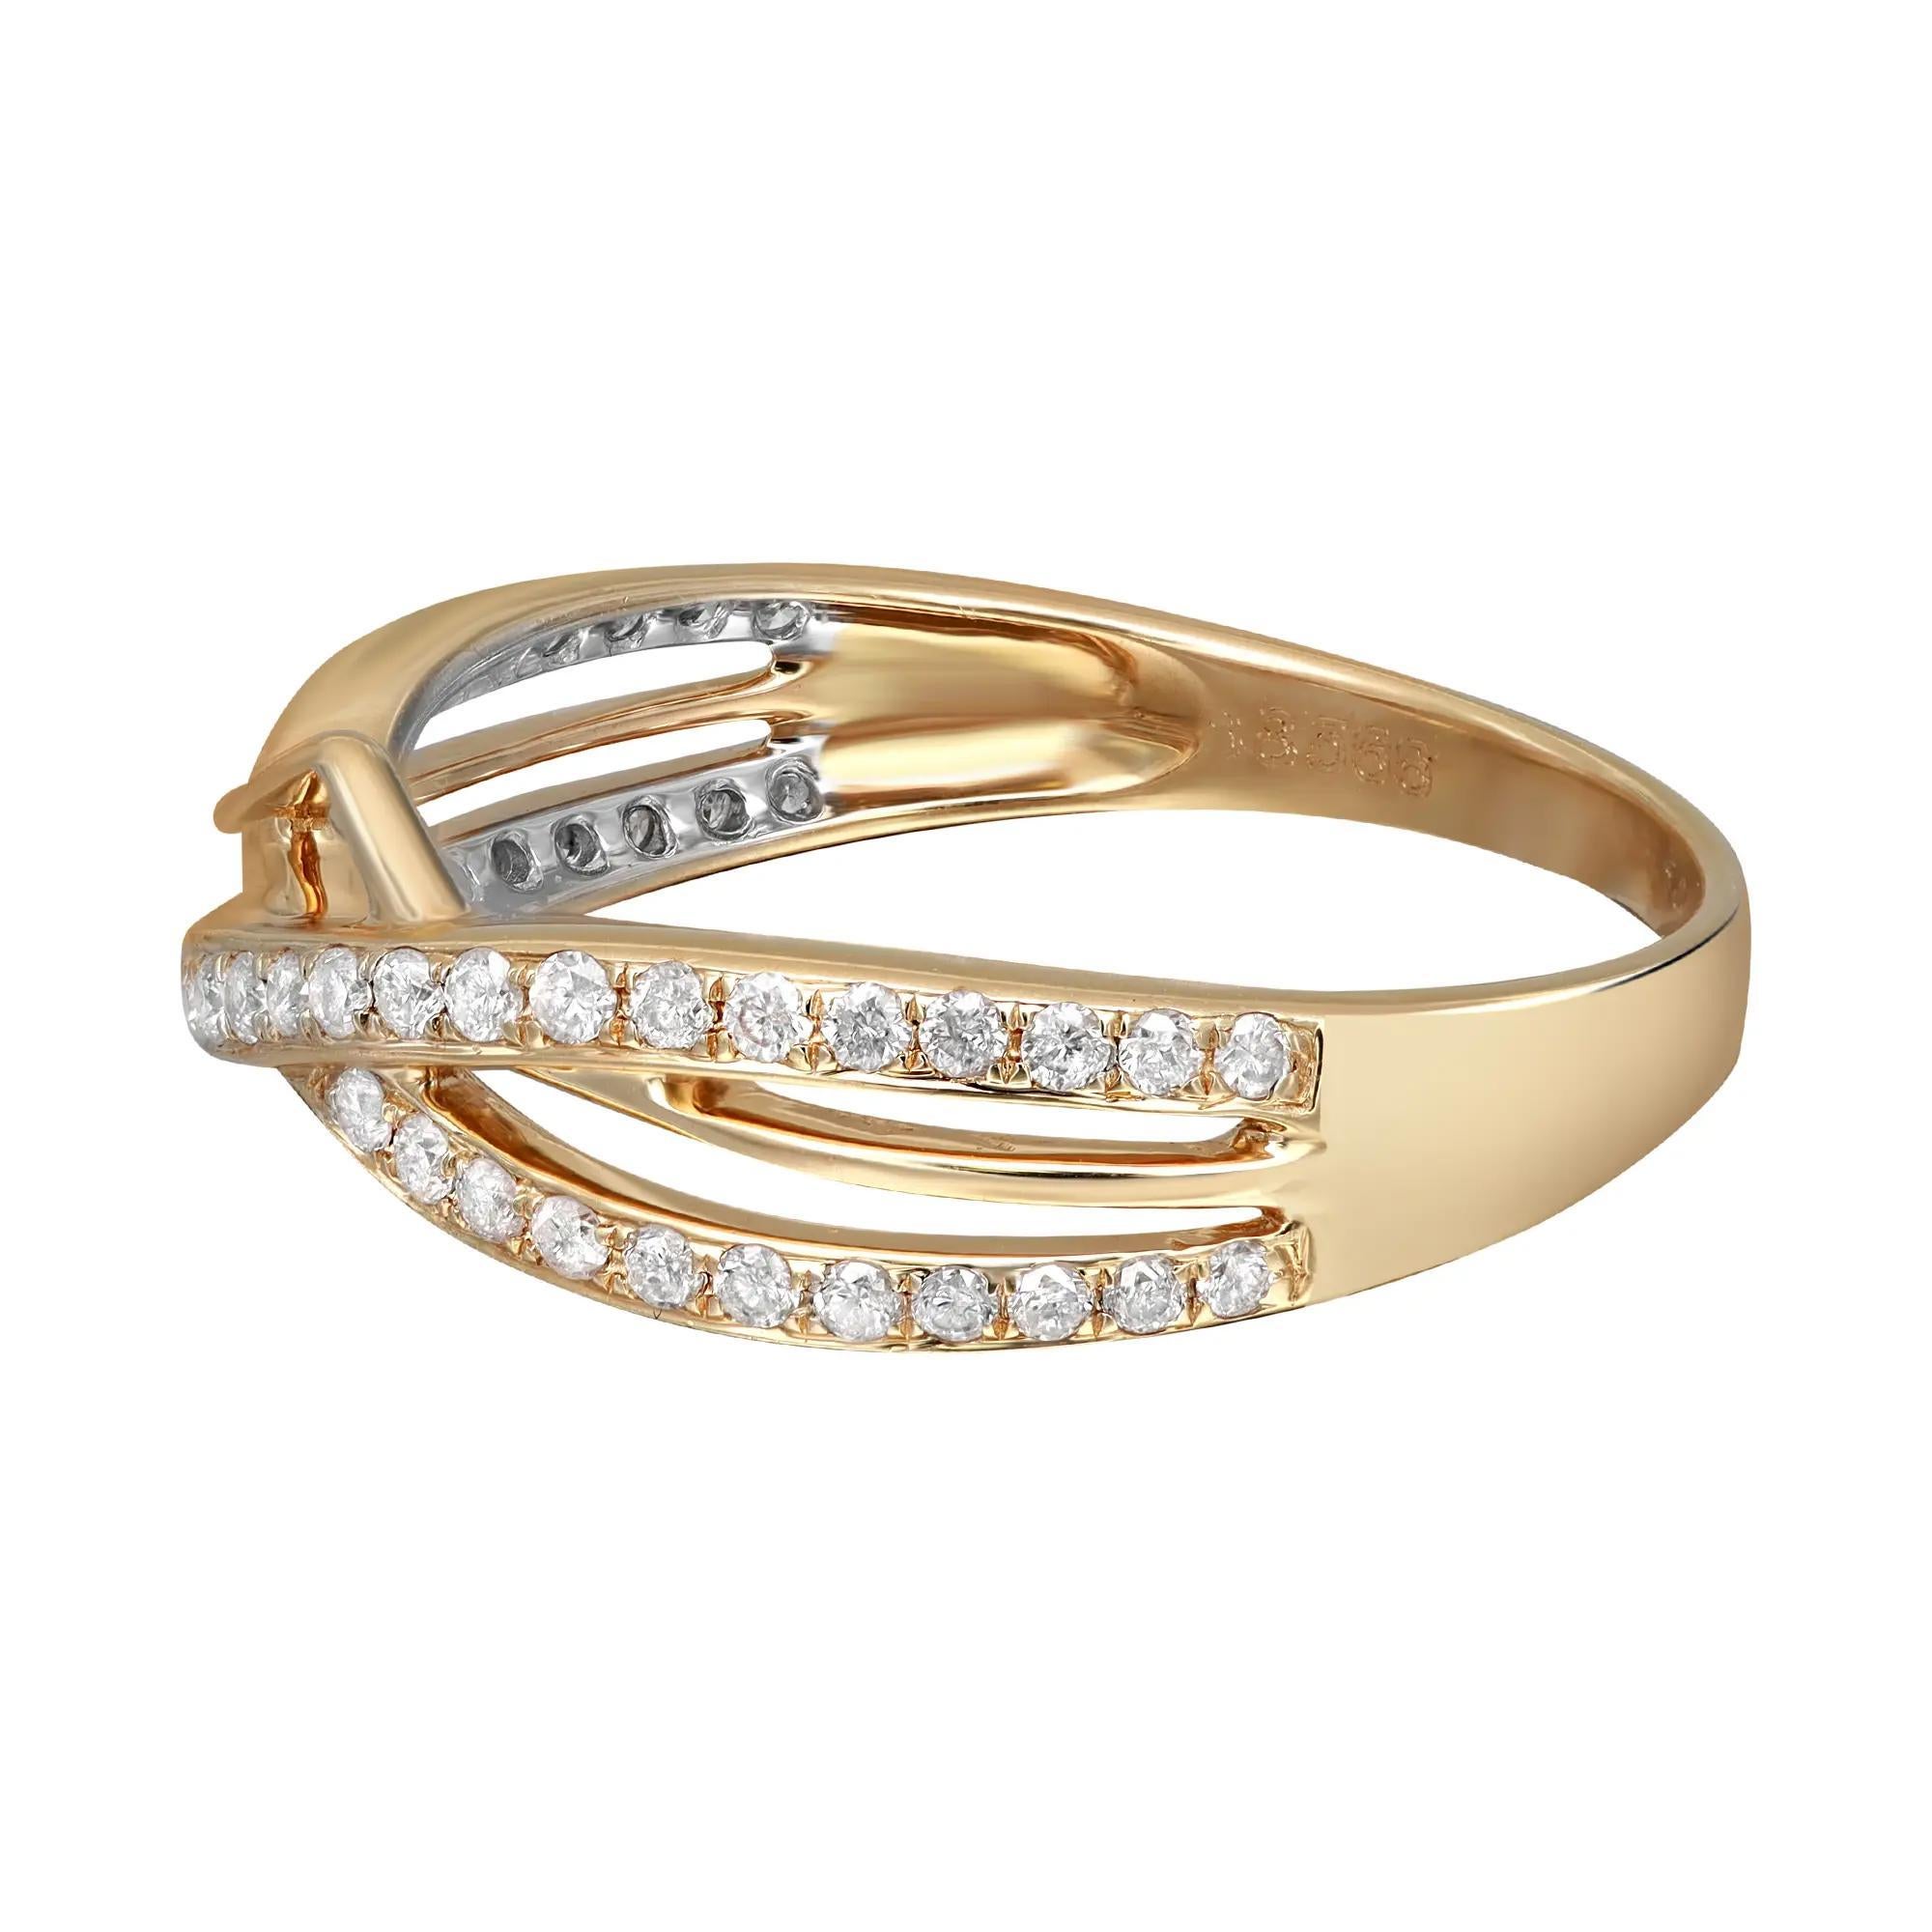 This stunning pave set round cut diamond band ring is a perfect fit for any occasion. Crafted in 14K yellow gold, it's stackable and easy to mix and match. The total diamond weight is 0.34 carat. Ring size 7.5. Weight: 3.18 grams. Comes with a